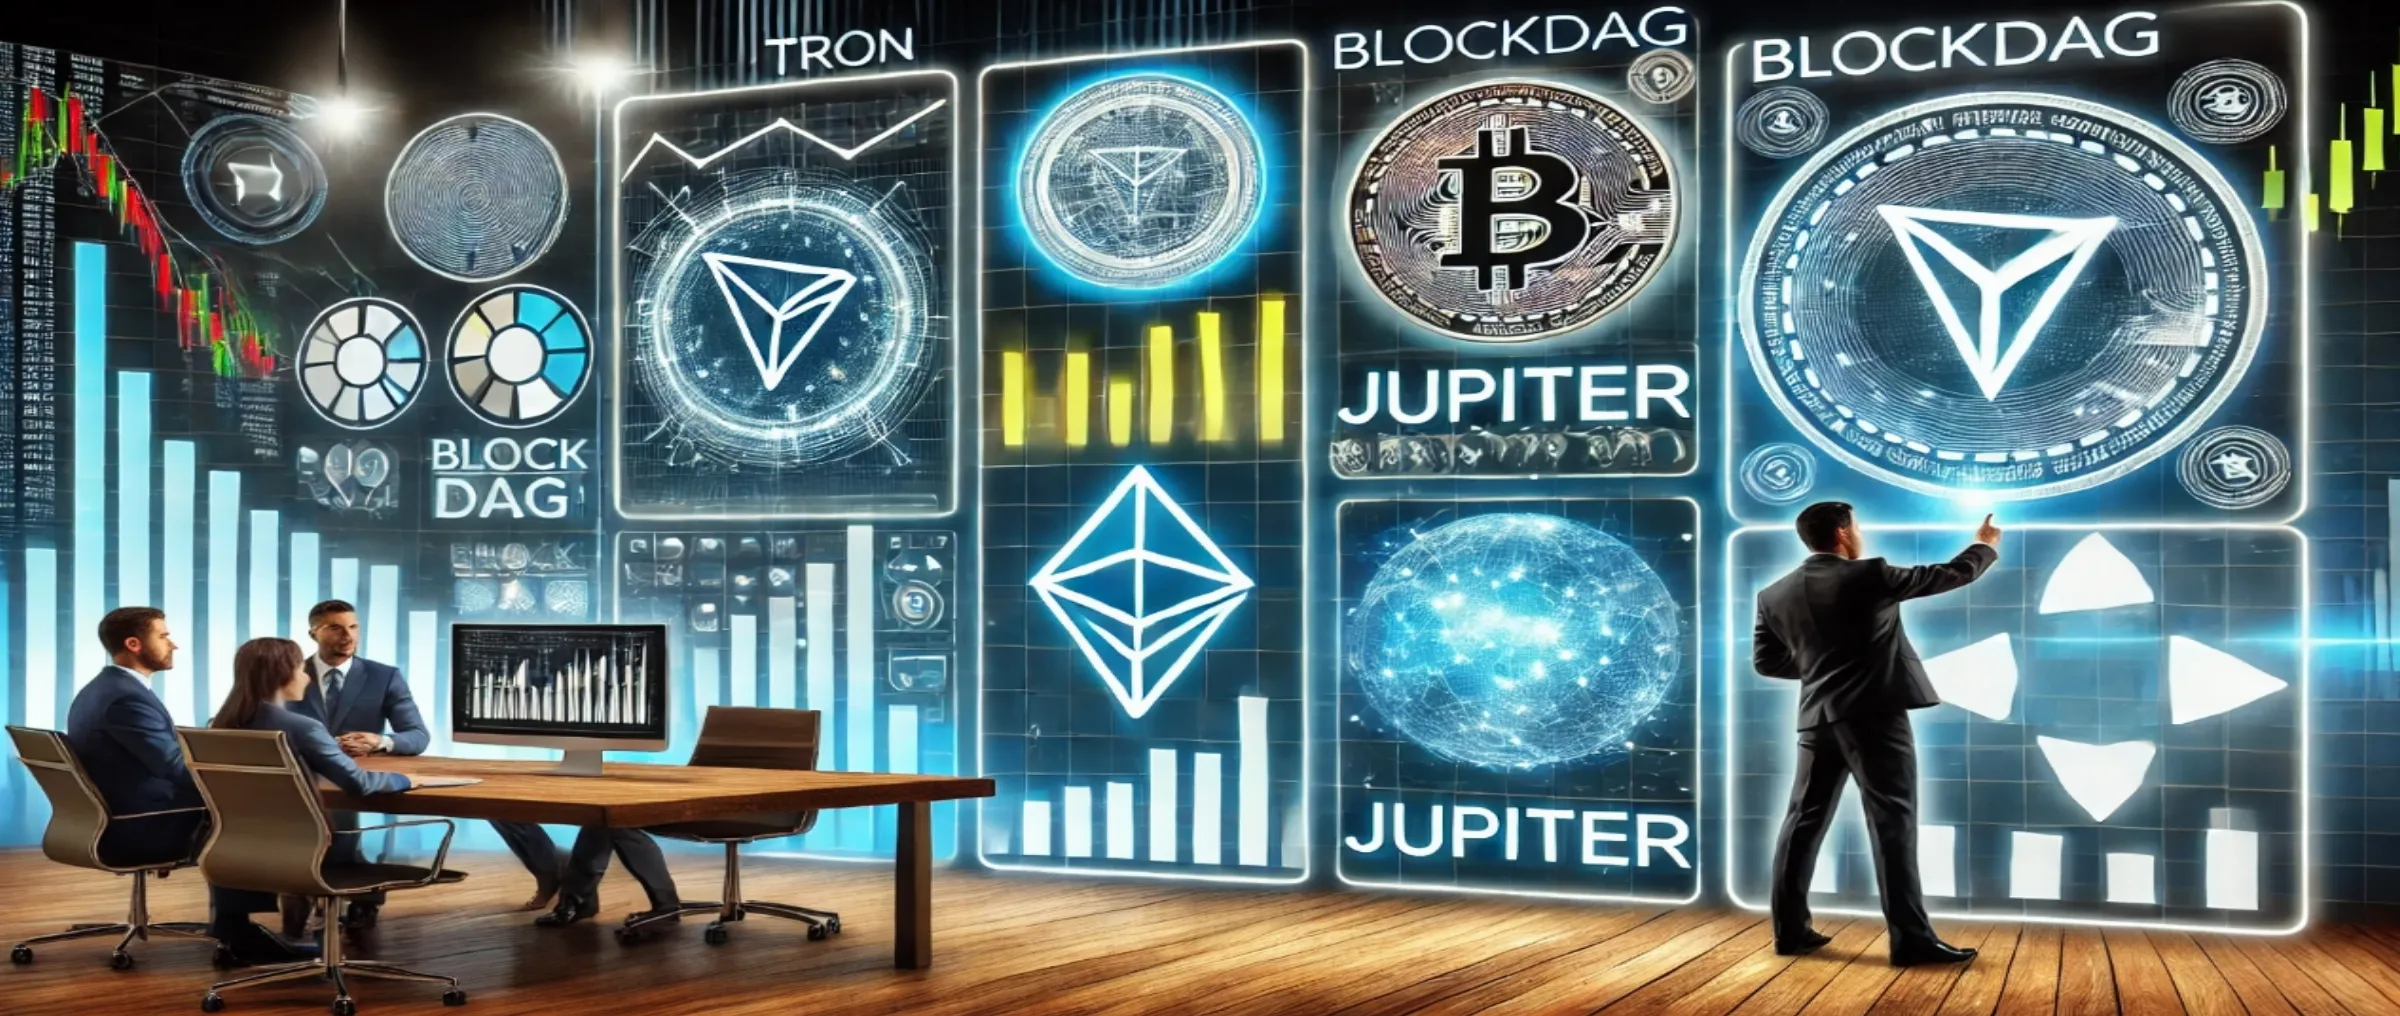 Analysis of TRON, Jupiter, and BlockDAG in the Crypto Market